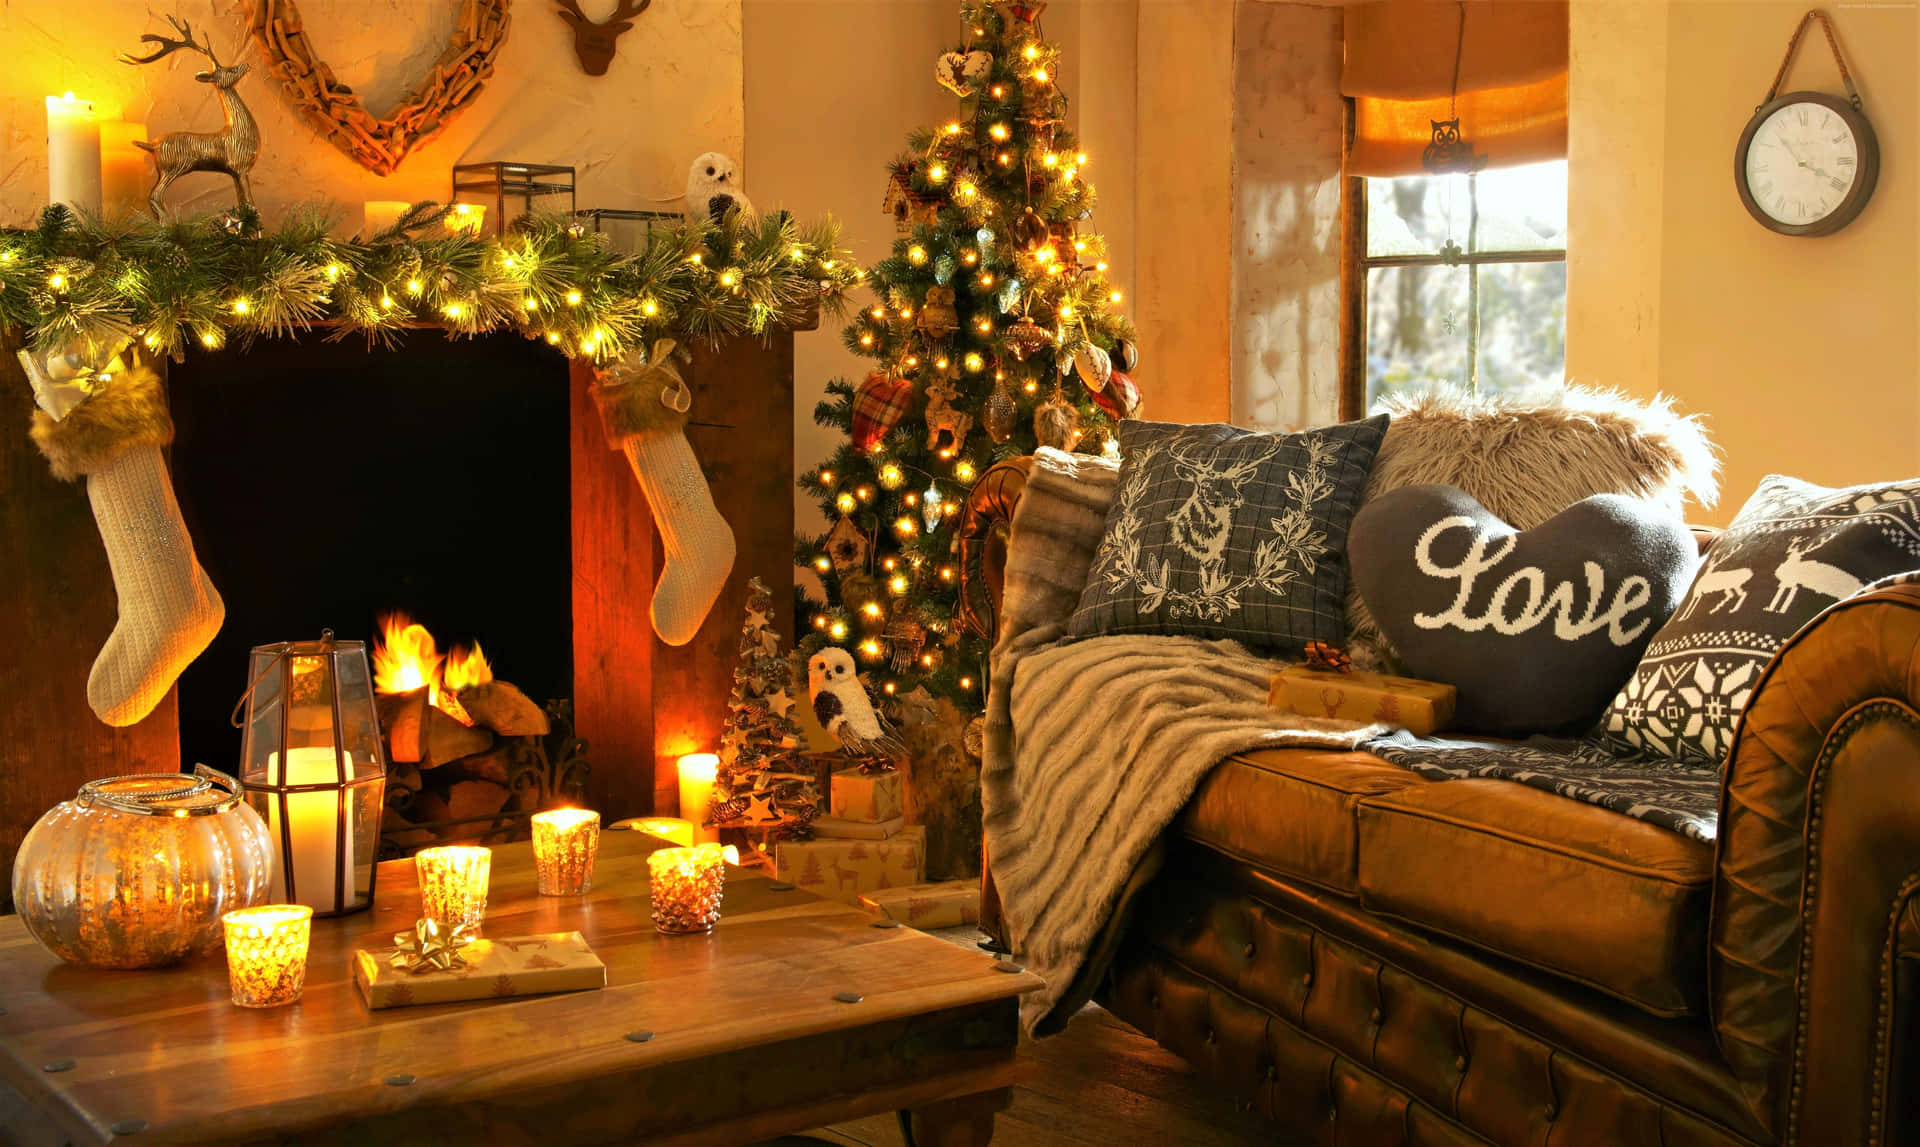 Captivating Christmas Atmosphere in Cozy Living Room Wallpaper